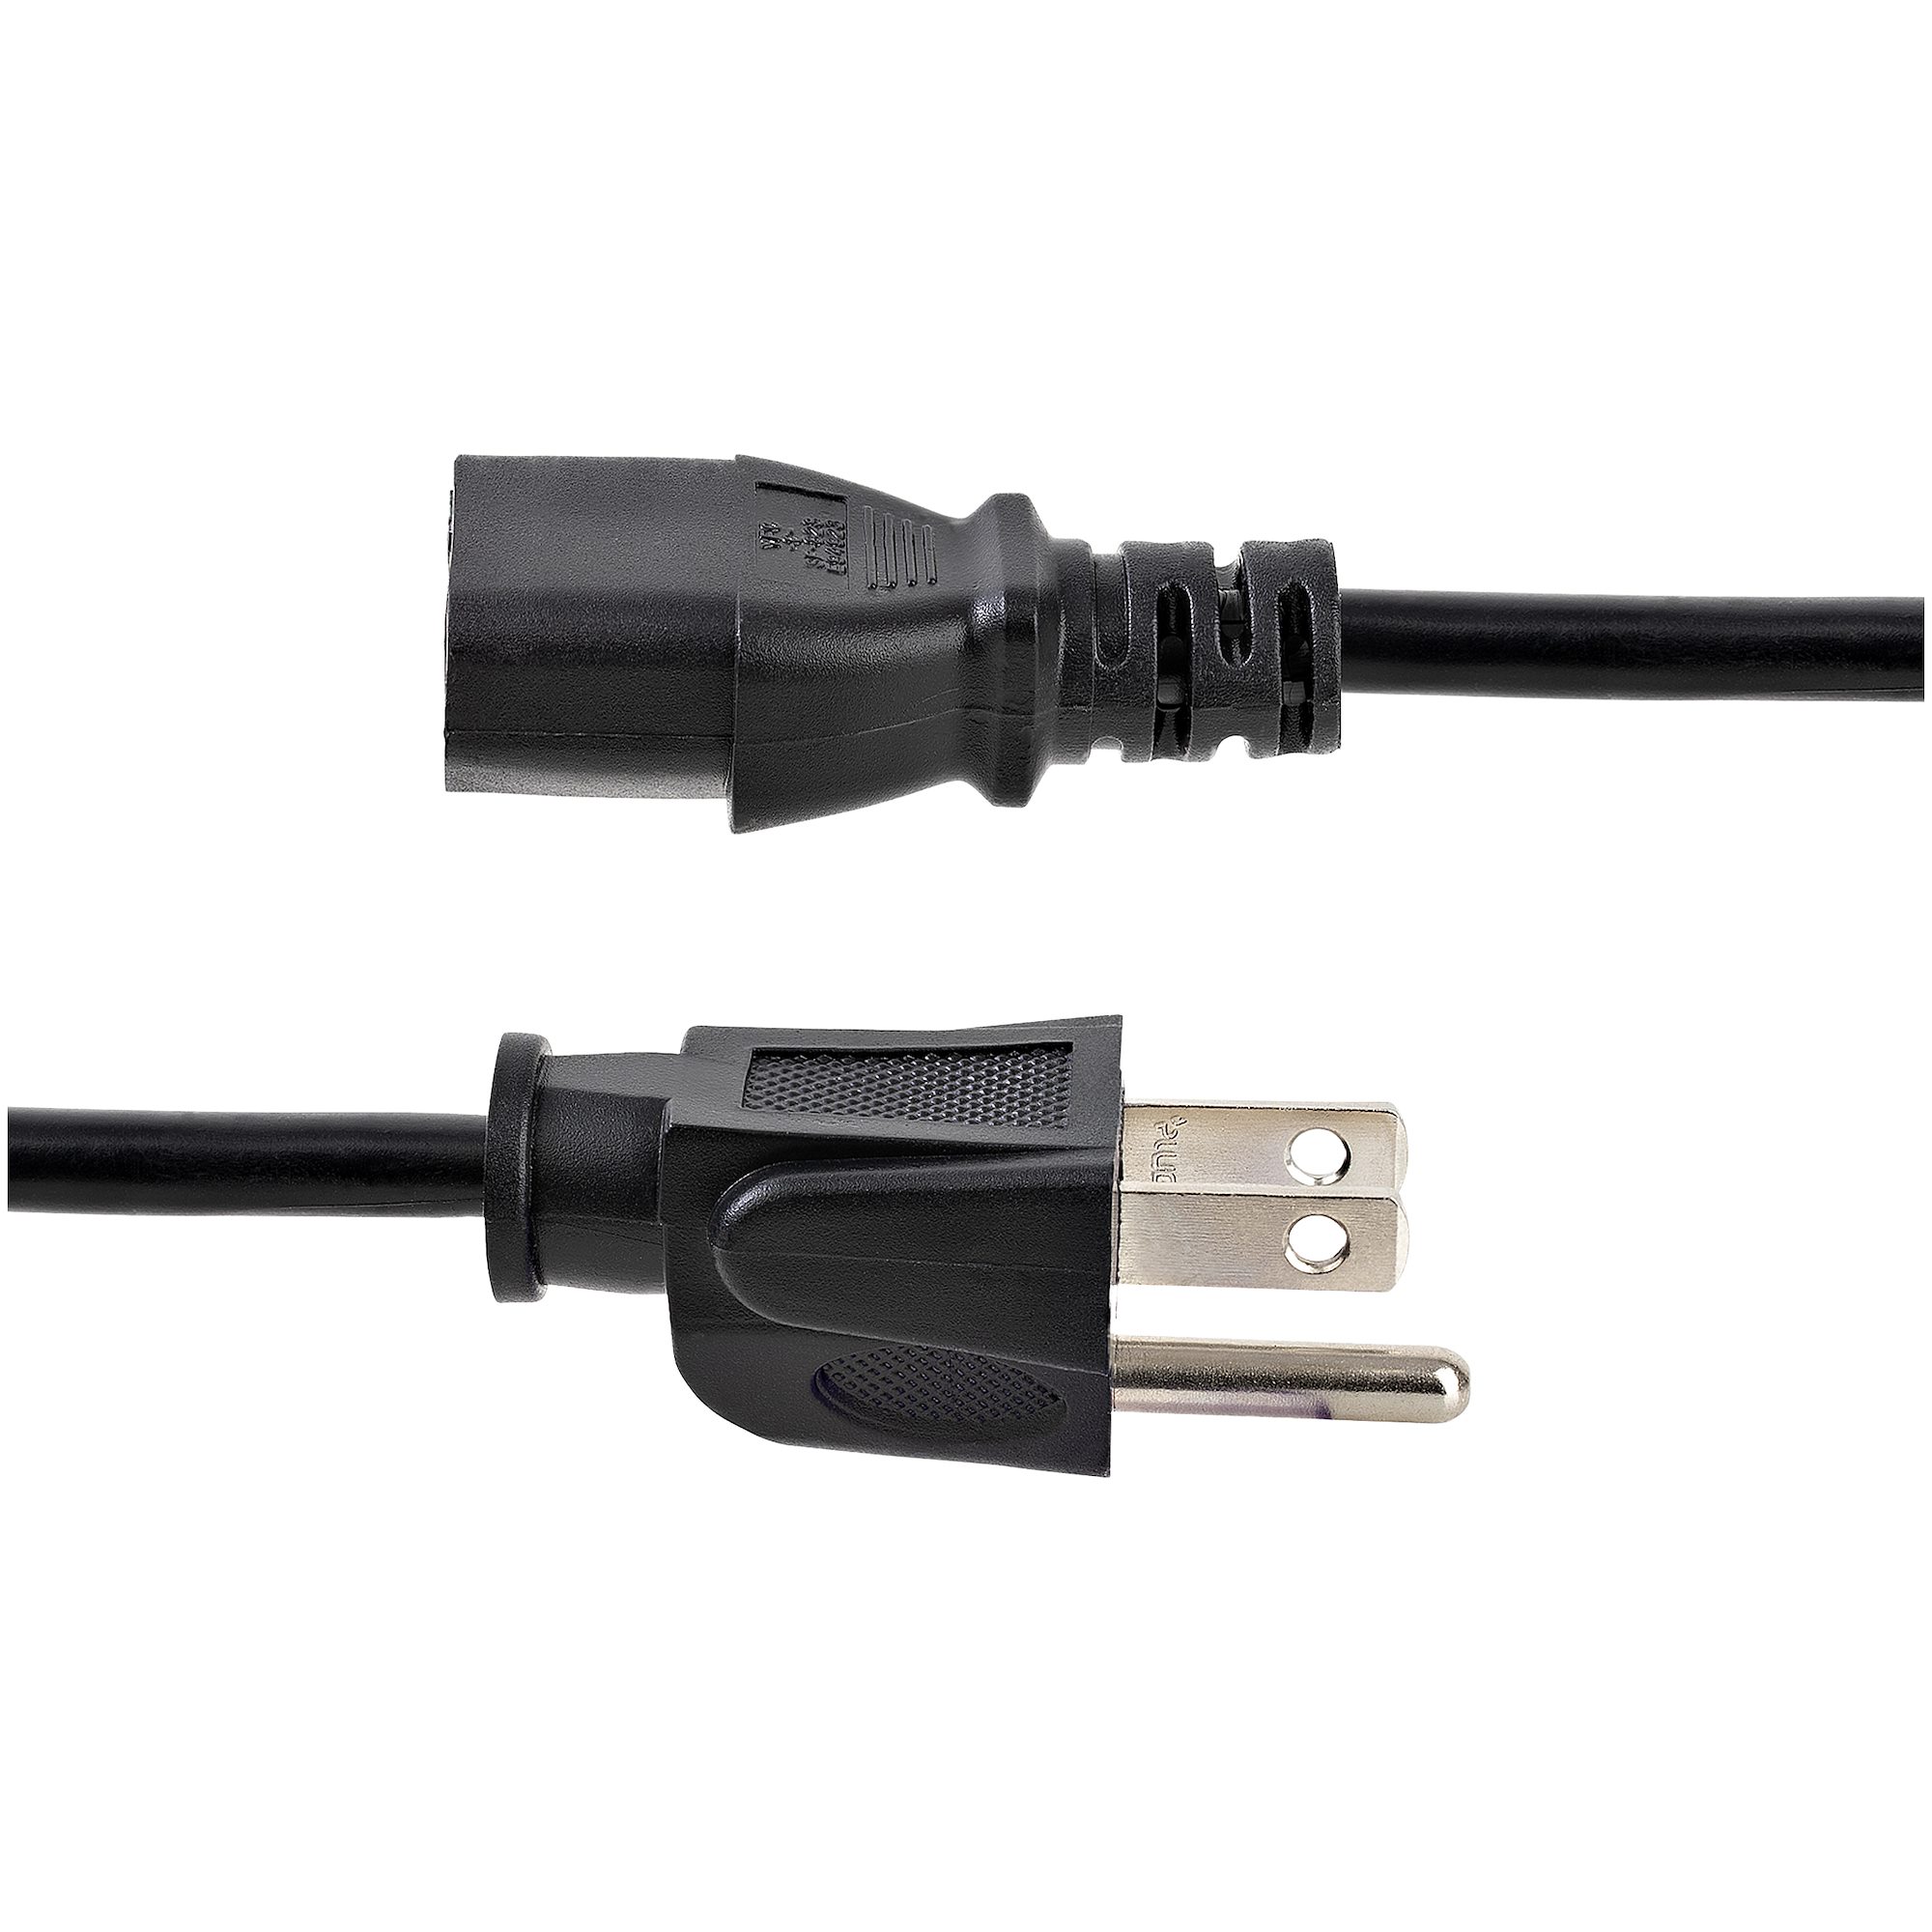 2x 1ft 3-Conductor 14AWG NEMA 5-15P to IEC320 C13 PC Power Cord Cable 3-Prong 